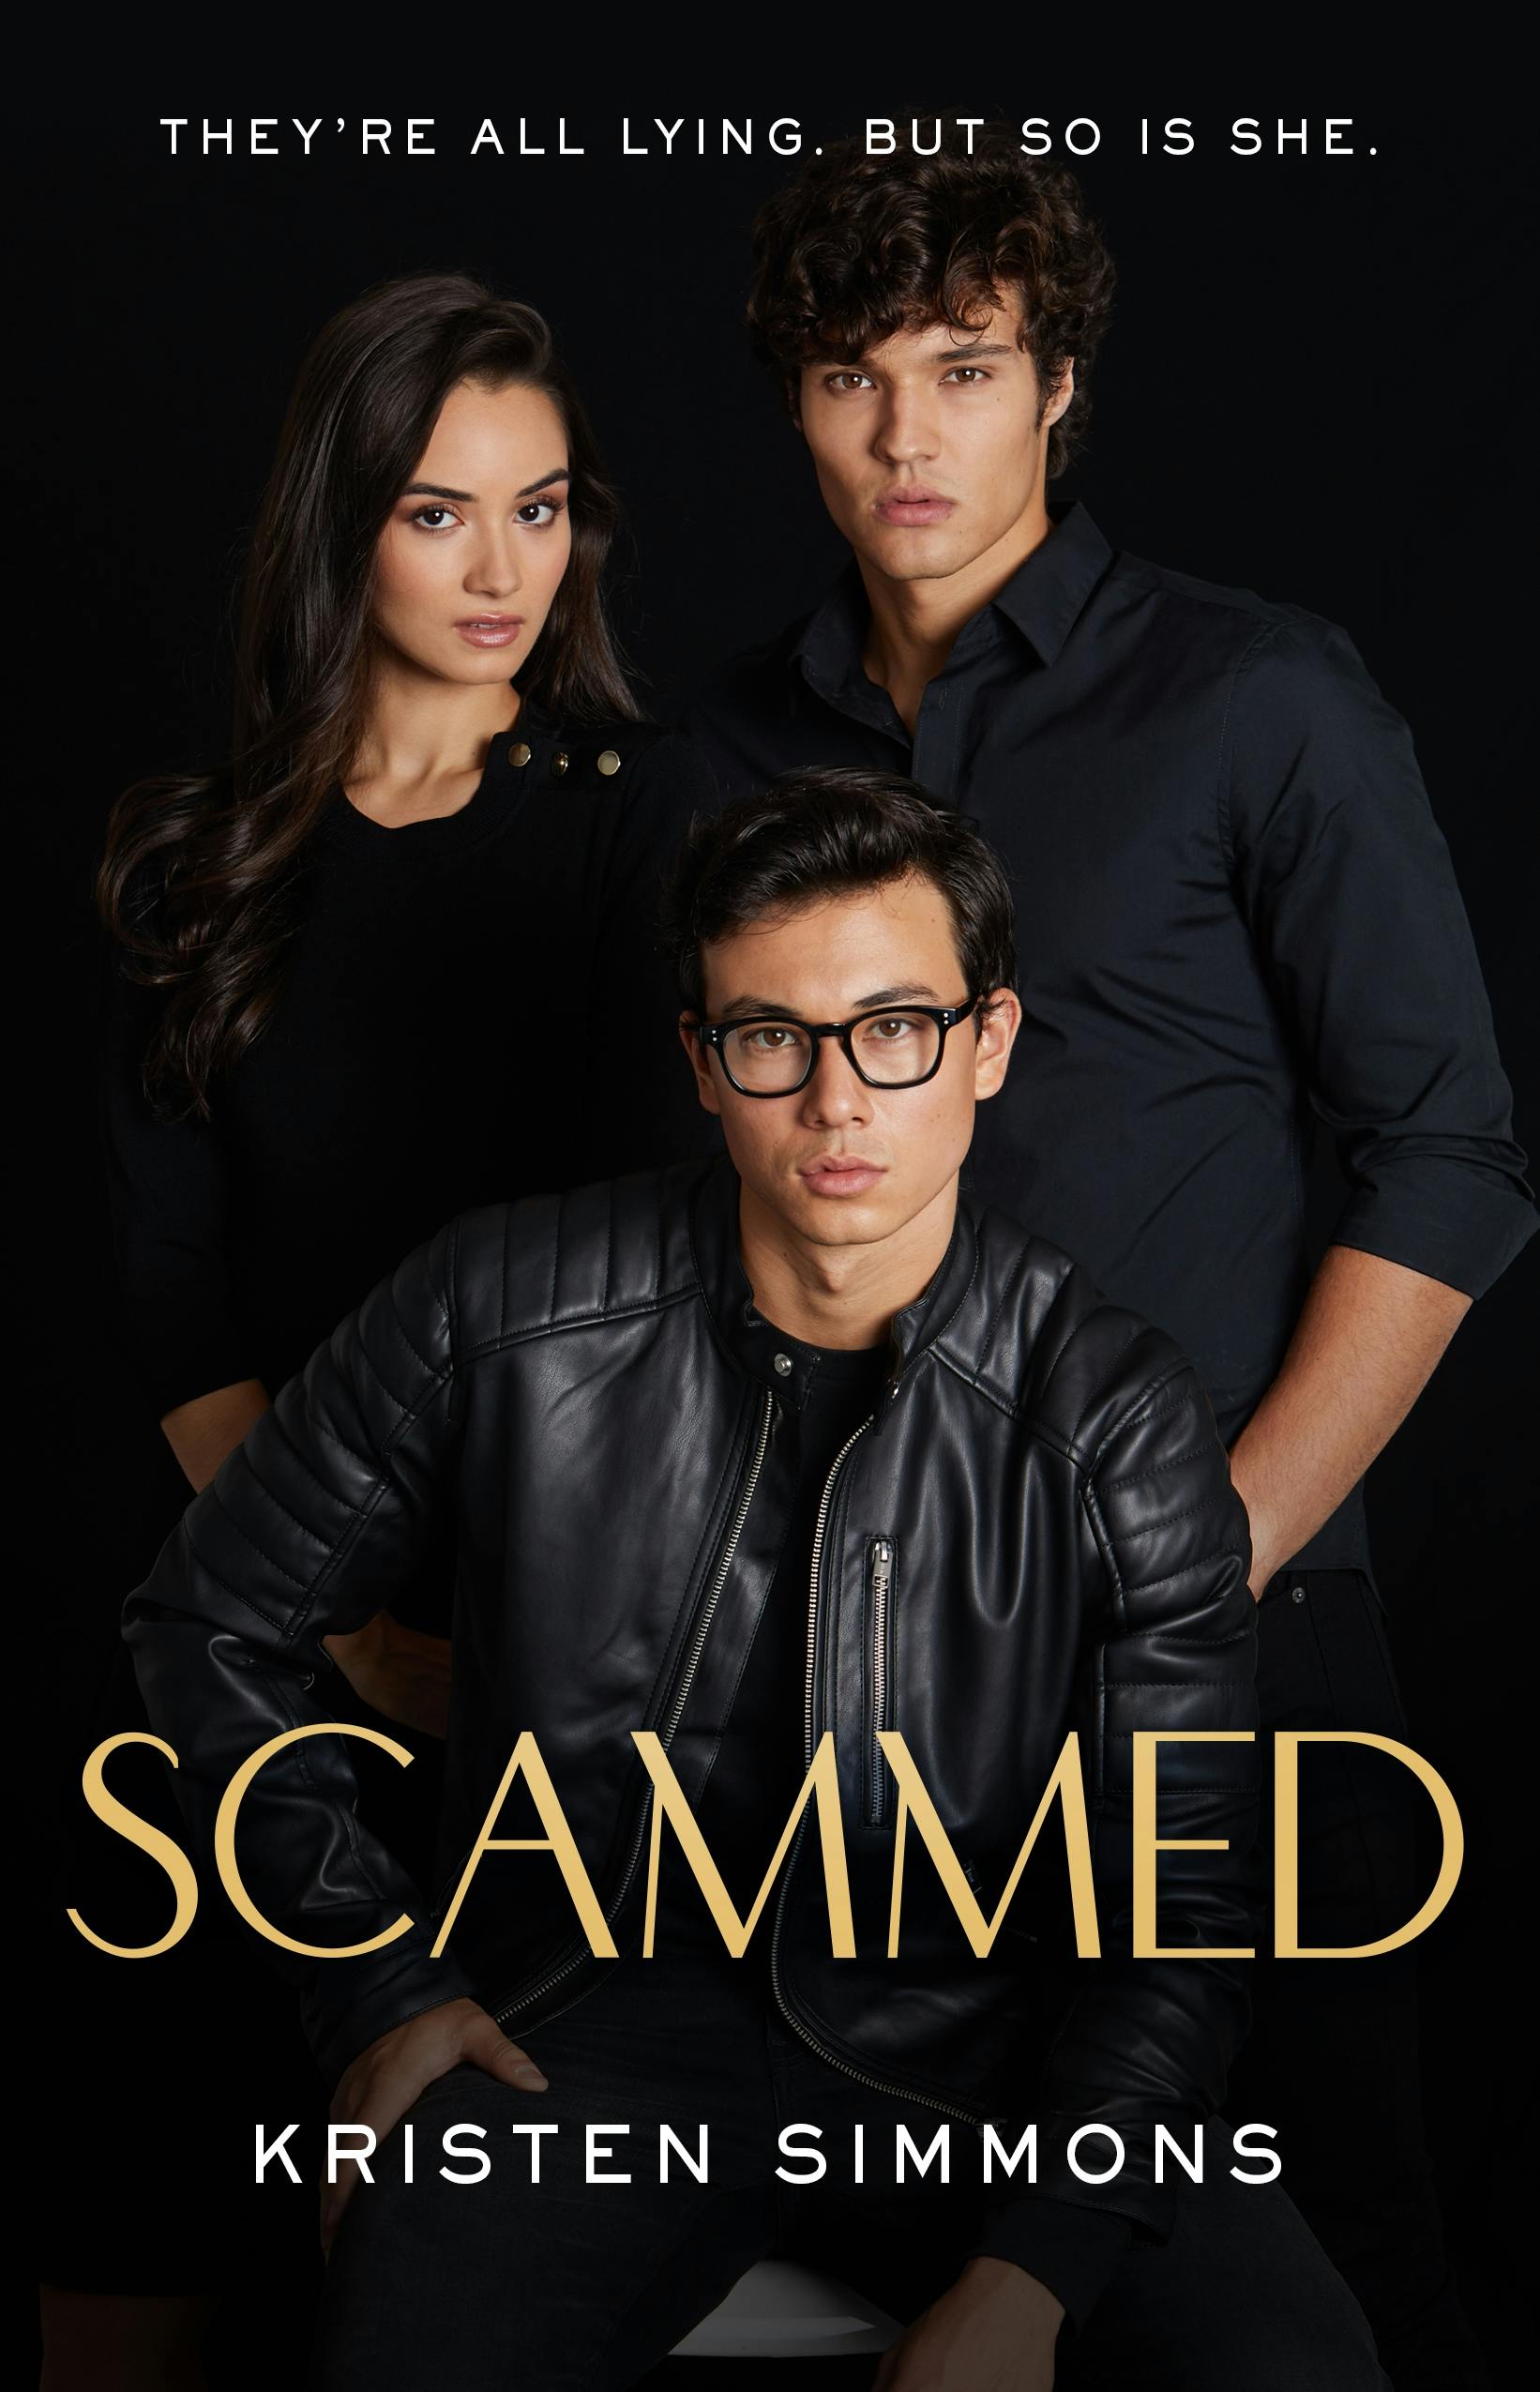 Cover for the book titled as: Scammed